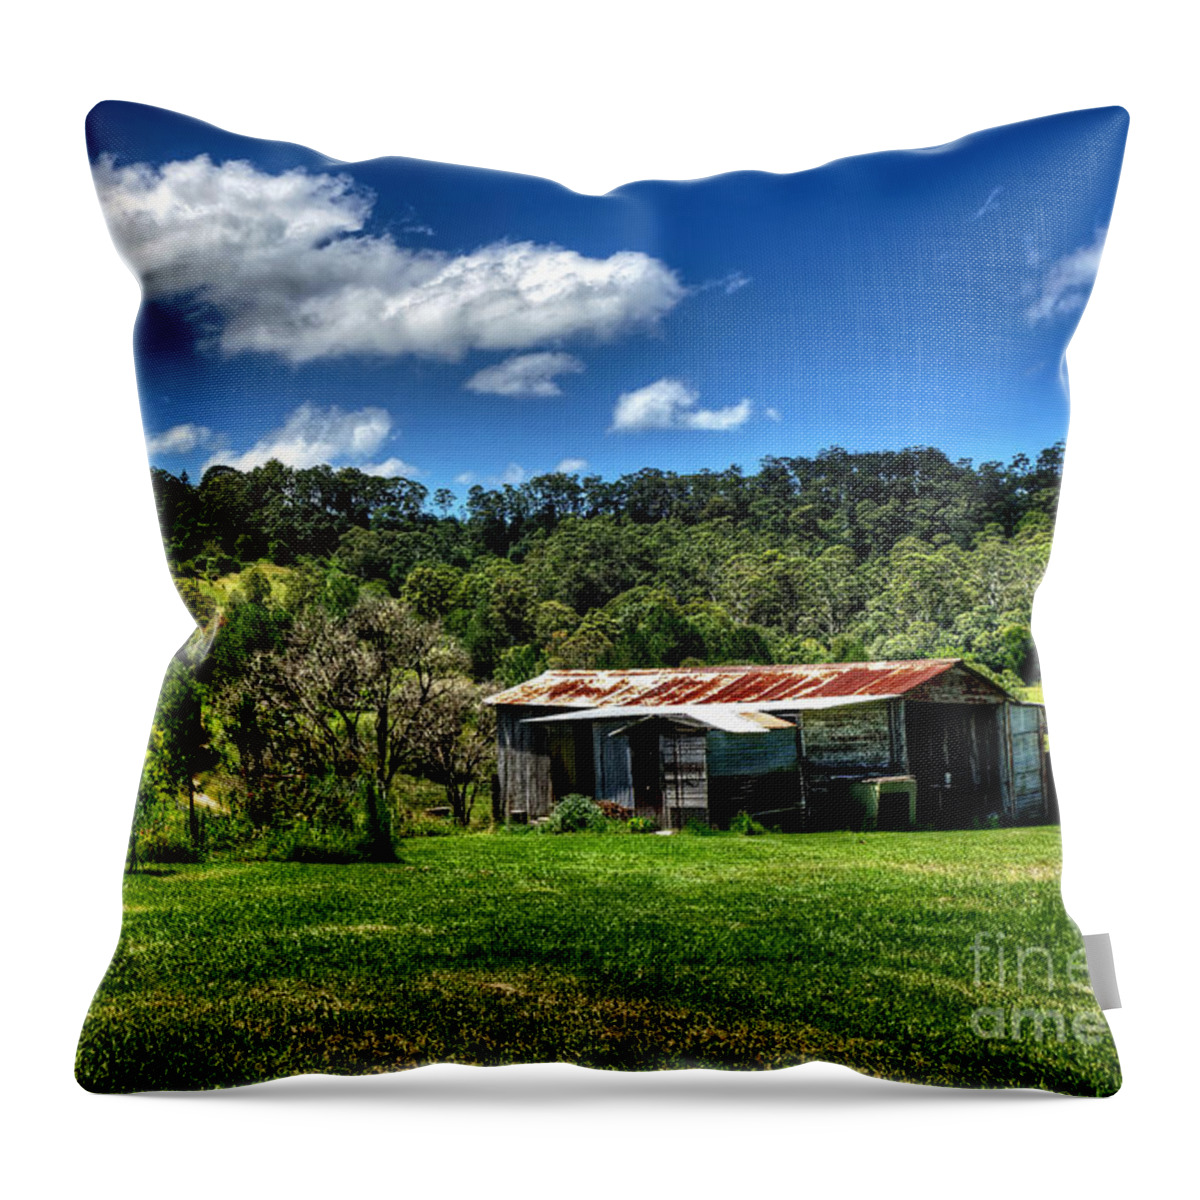 Photography Throw Pillow featuring the photograph Old Barn in Lush Green Countryside by Kaye Menner